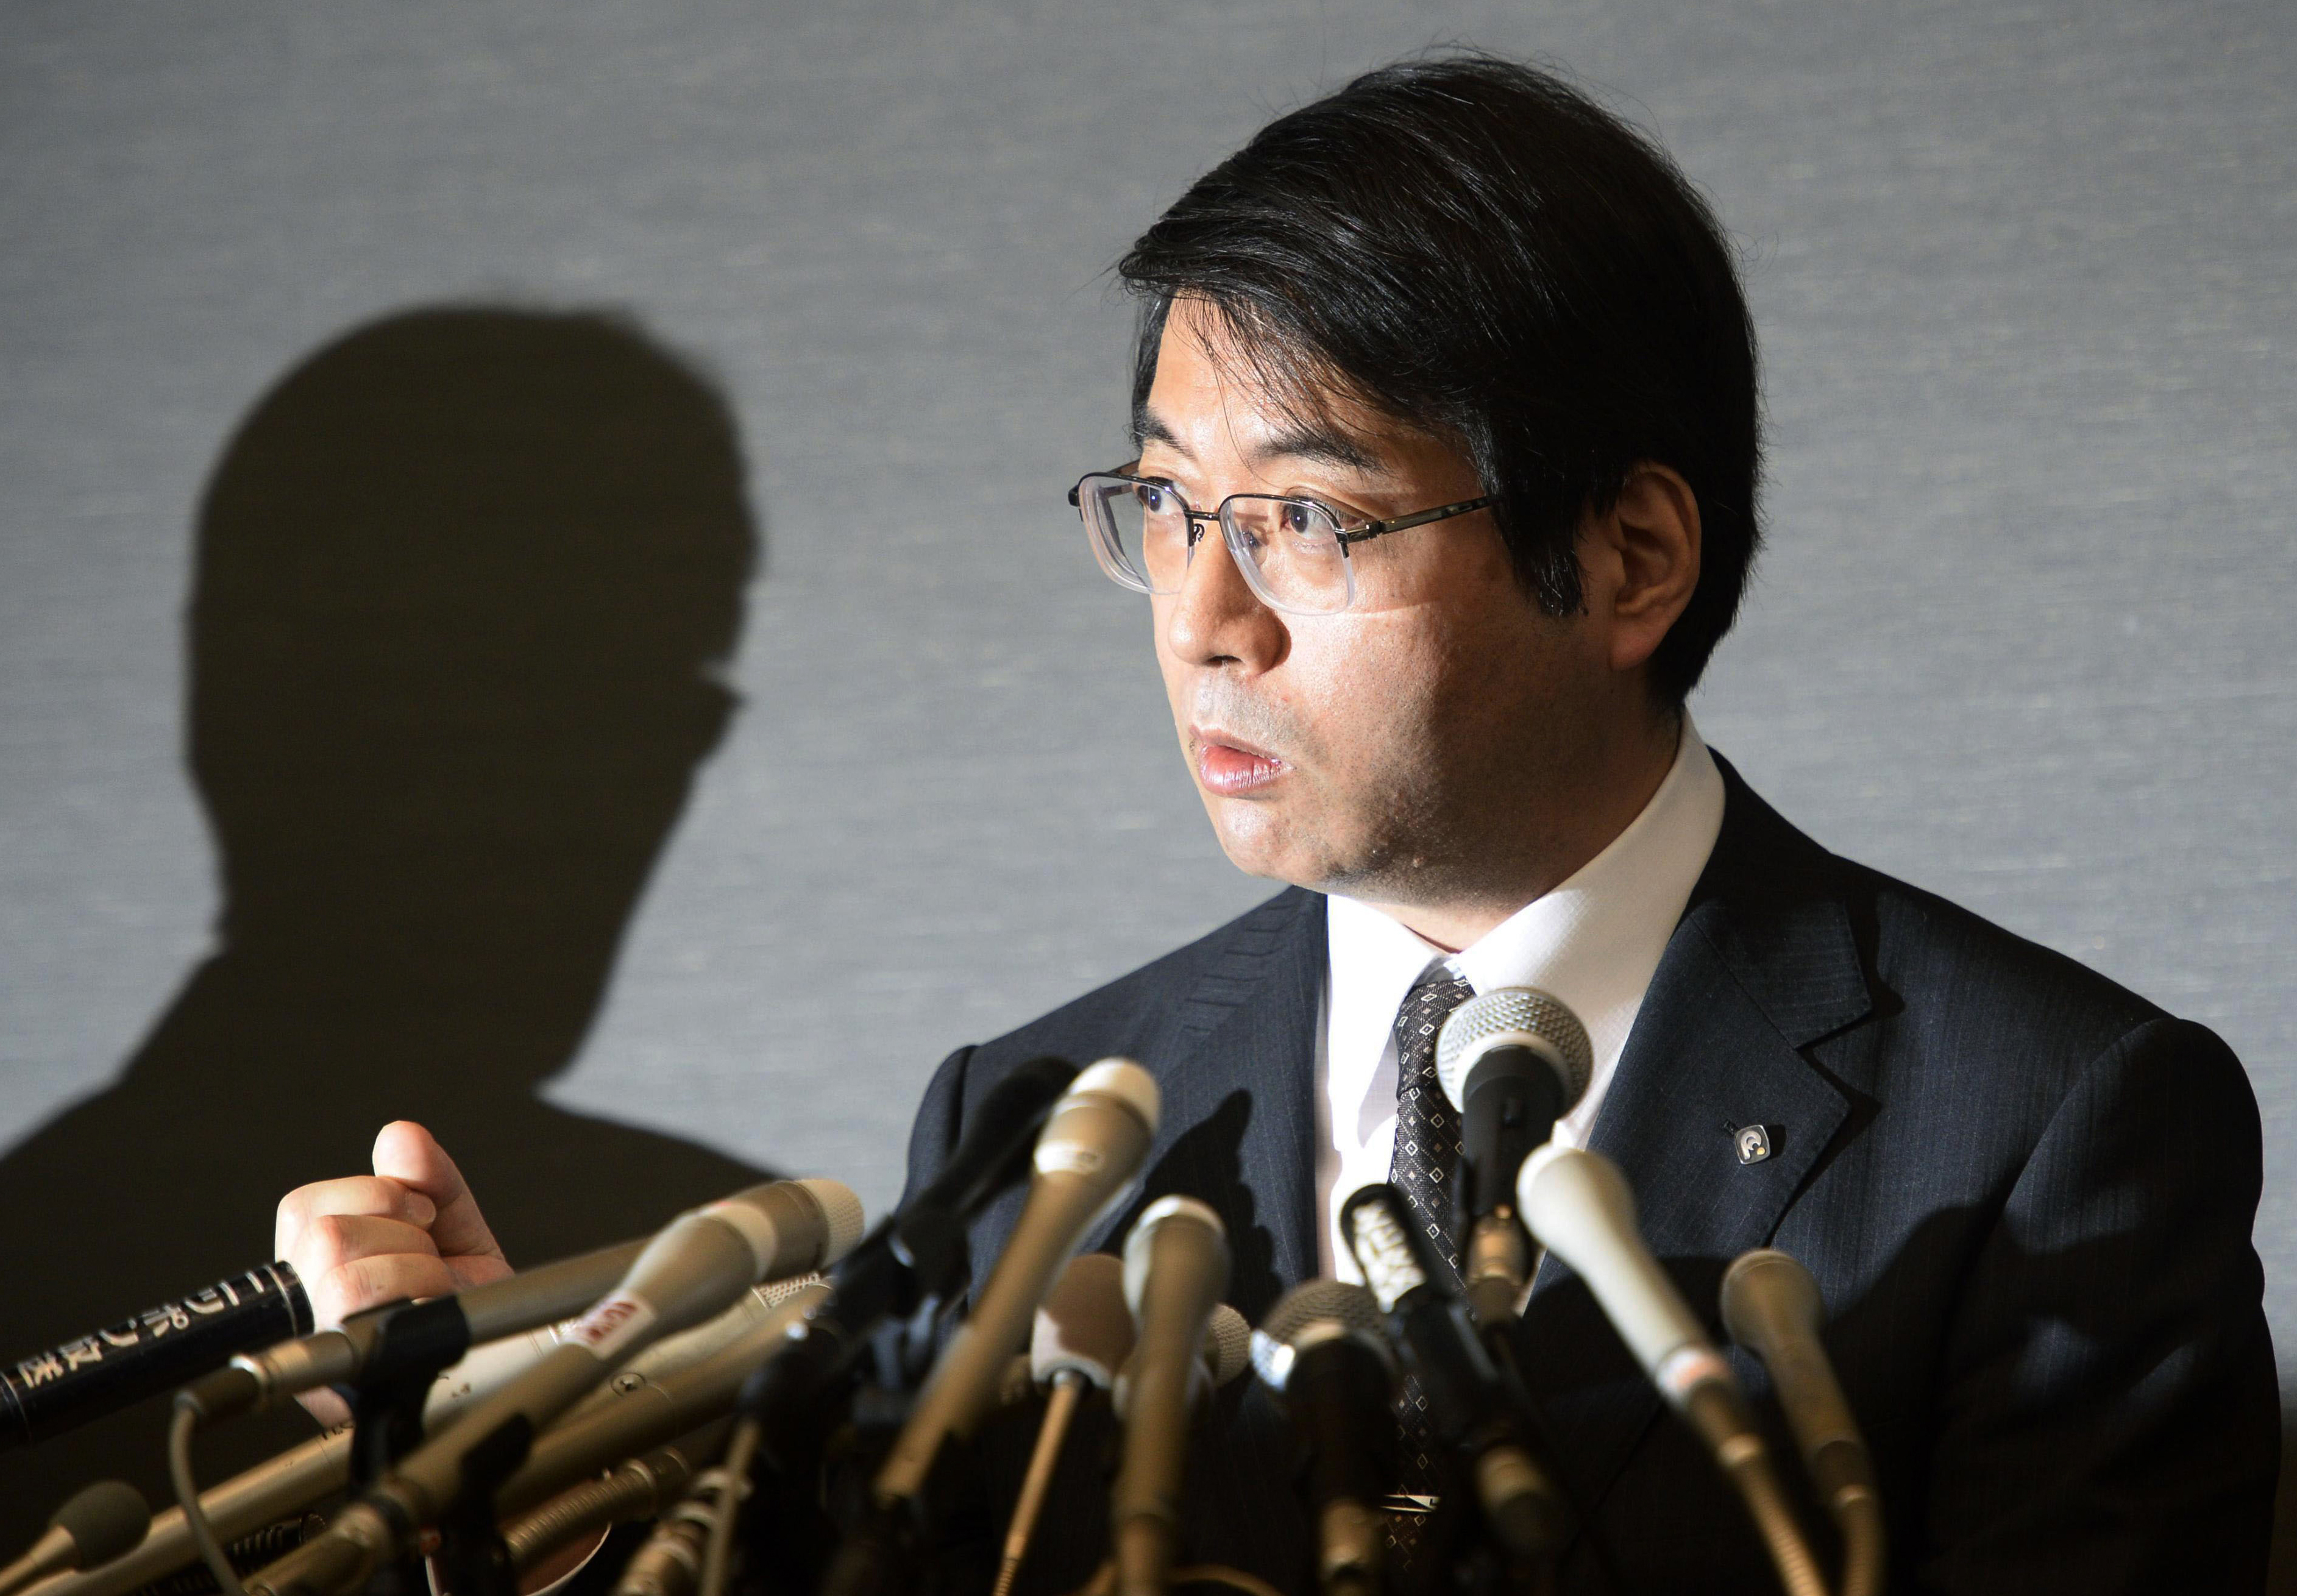 Yoshiki Sasai, deputy chief of the RIKEN Center for Developmental Biology, speaks during a press conference in Tokyo on April 16, 2014. Police said Sasai, 52, was found dead on Tuesday, Aug. 5, 2014. (AP)